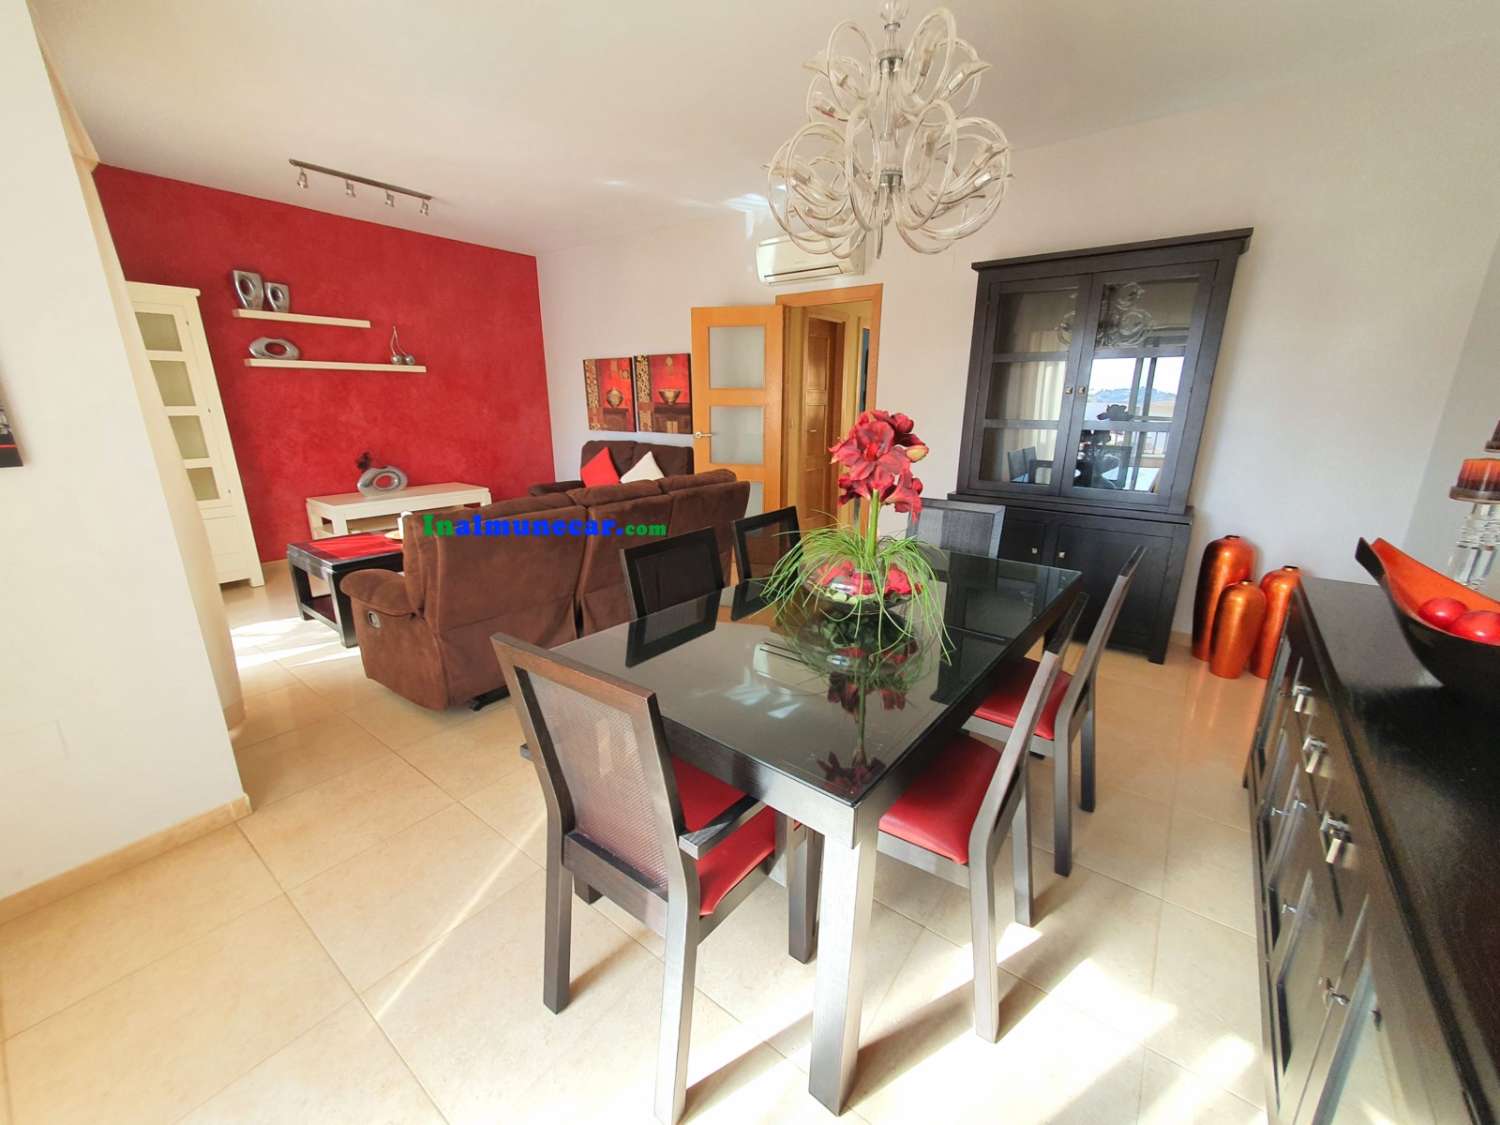 Townhouse for sale in Almuñecar, very sunny and bright and with private pool.